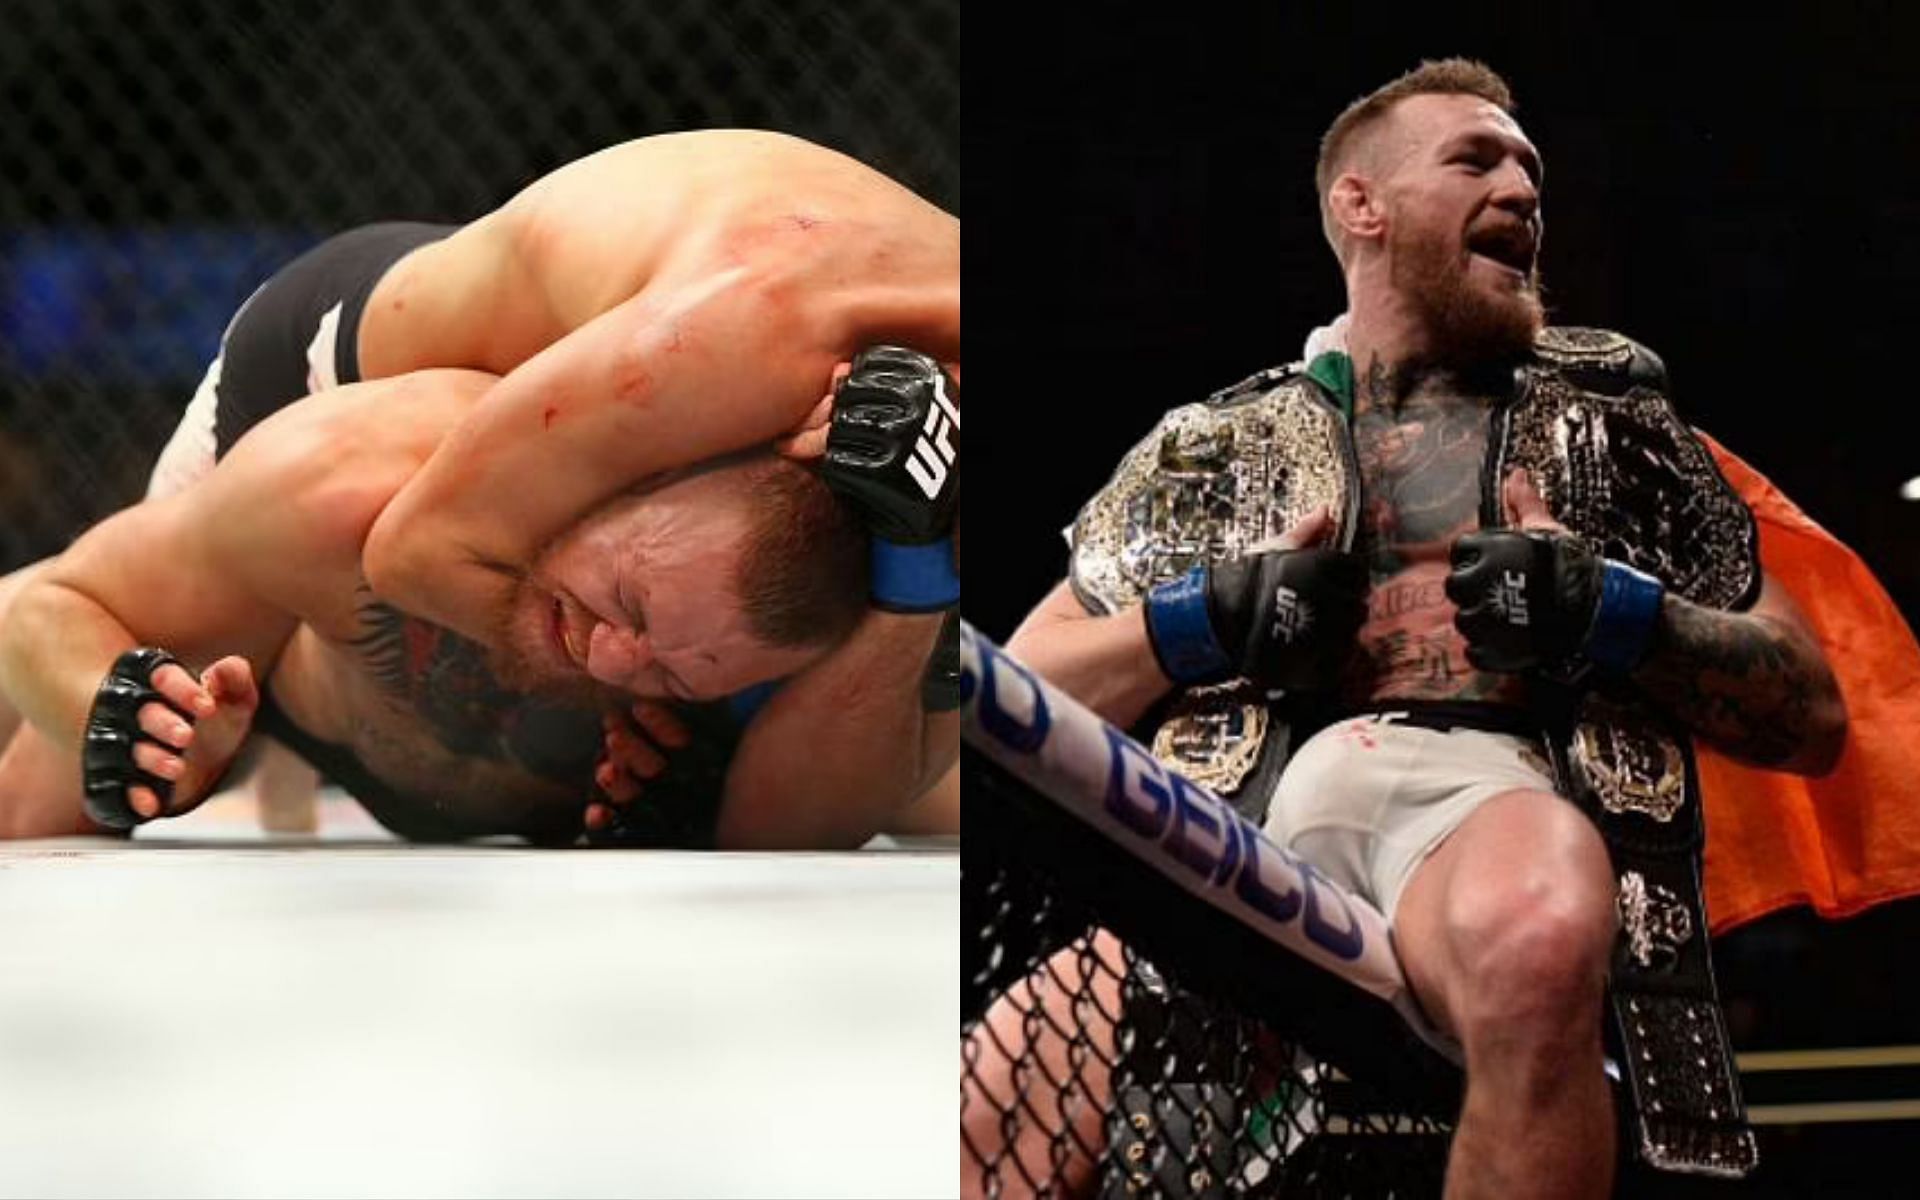 Conor McGregor has seen his fair share of ups and downs in his UFC career